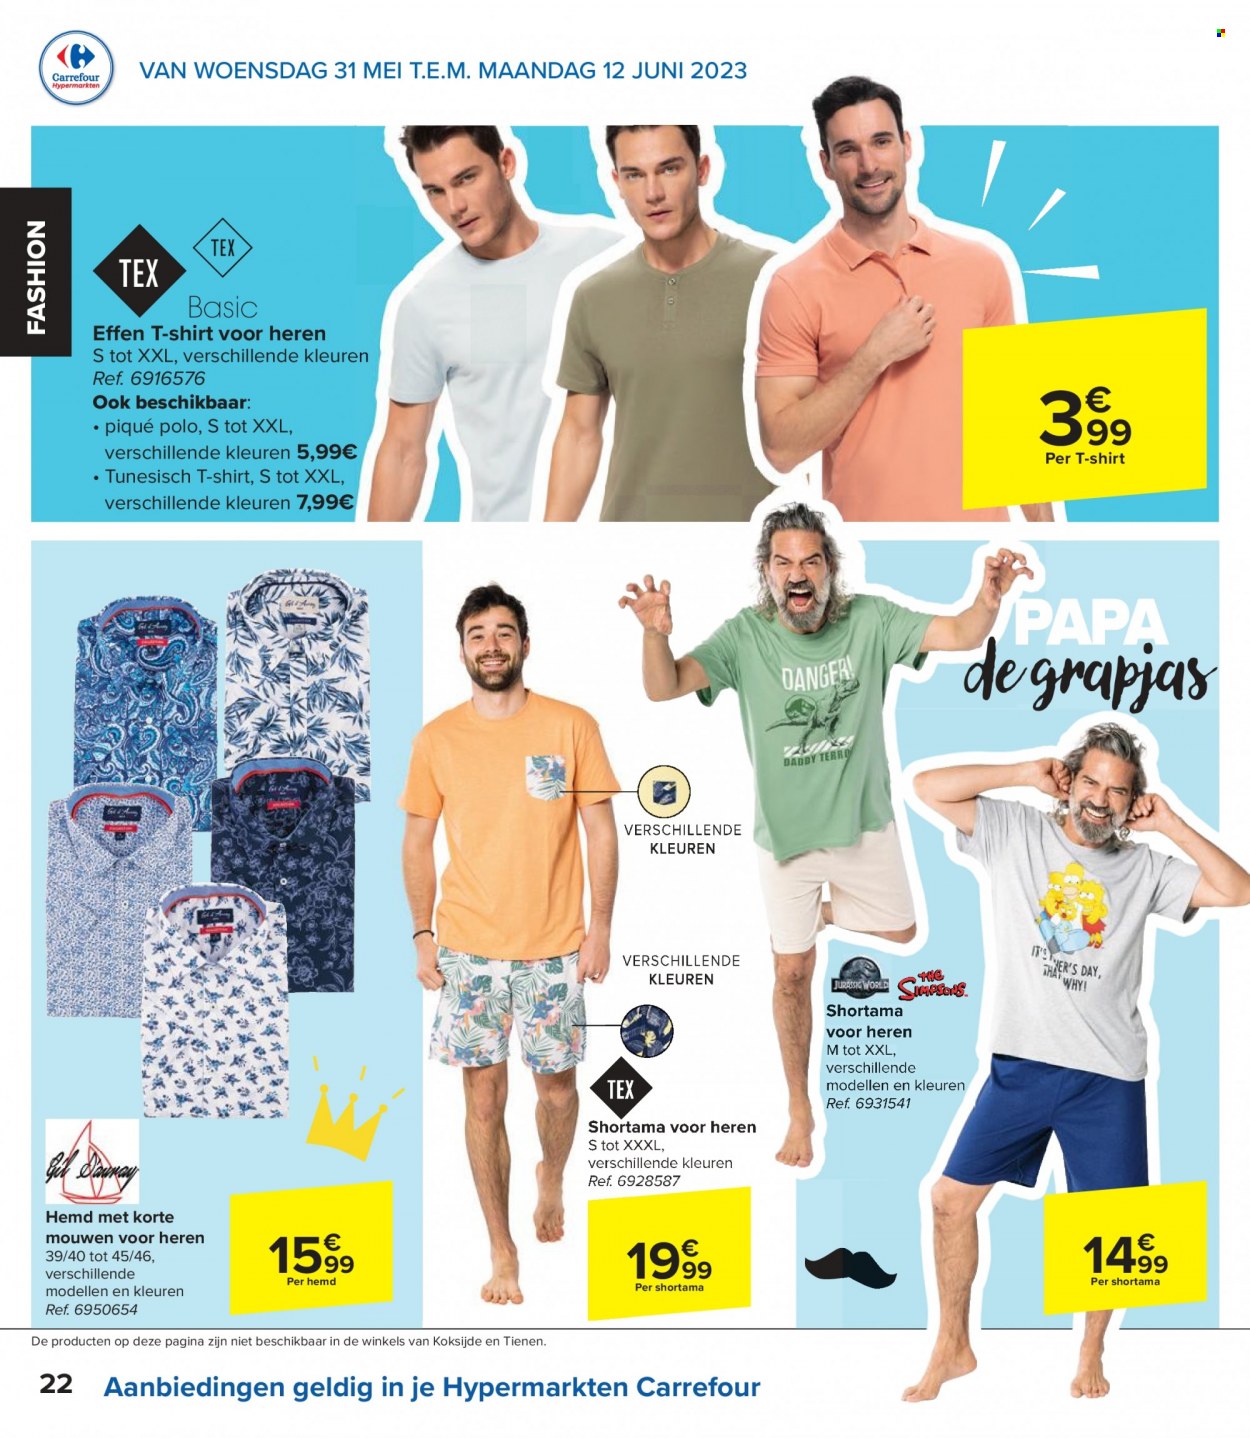 Catalogue Carrefour hypermarkt - 31.5.2023 - 12.6.2023. Page 22.